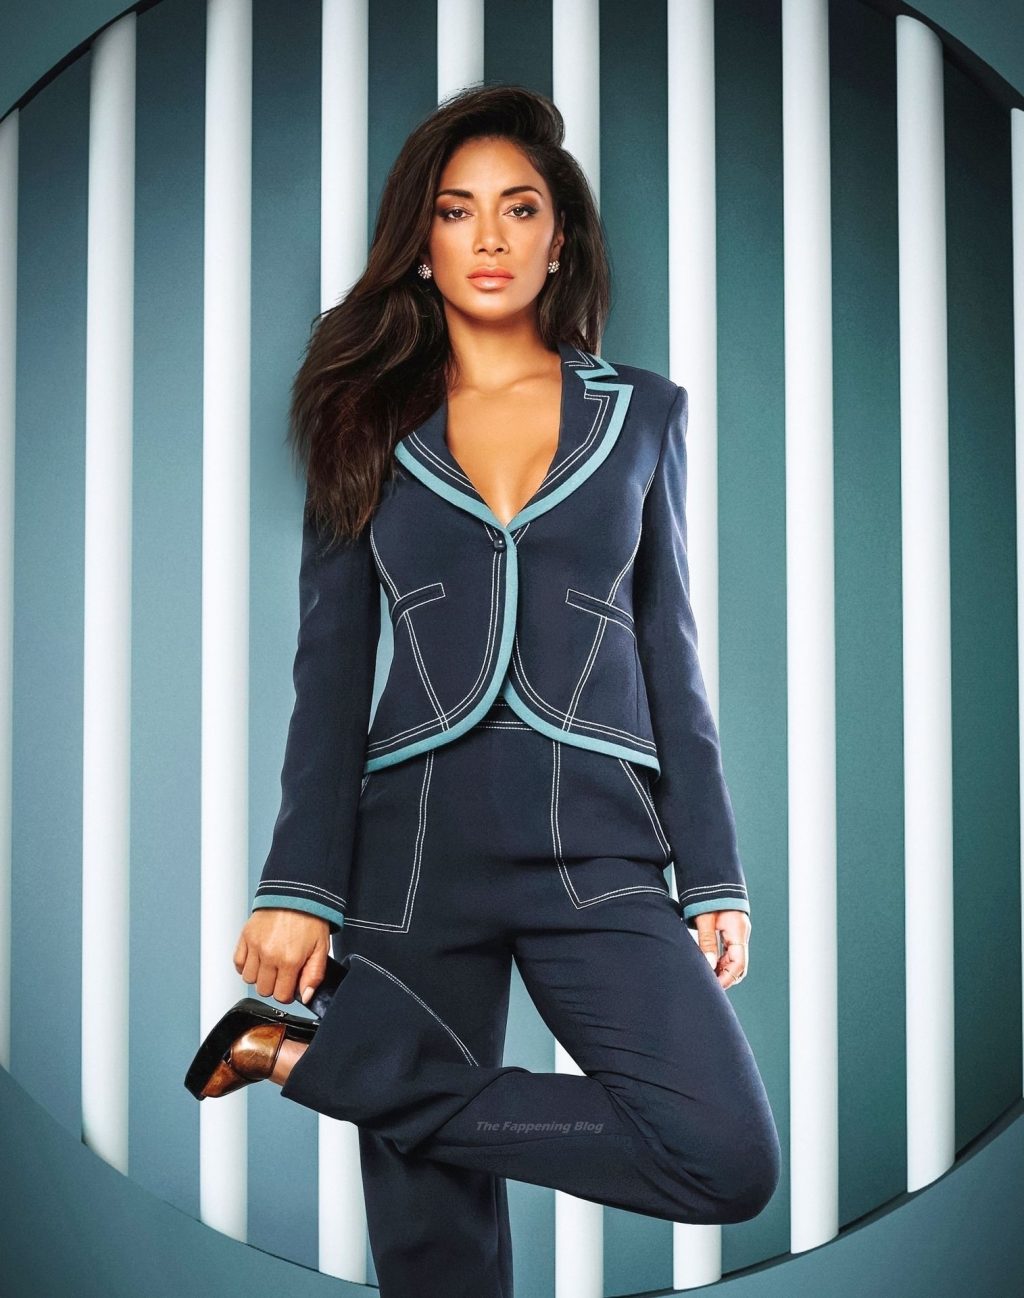 Nicole Scherzinger Looks Glamorous in a Suit as She Poses For a Shoot (7 Photos)